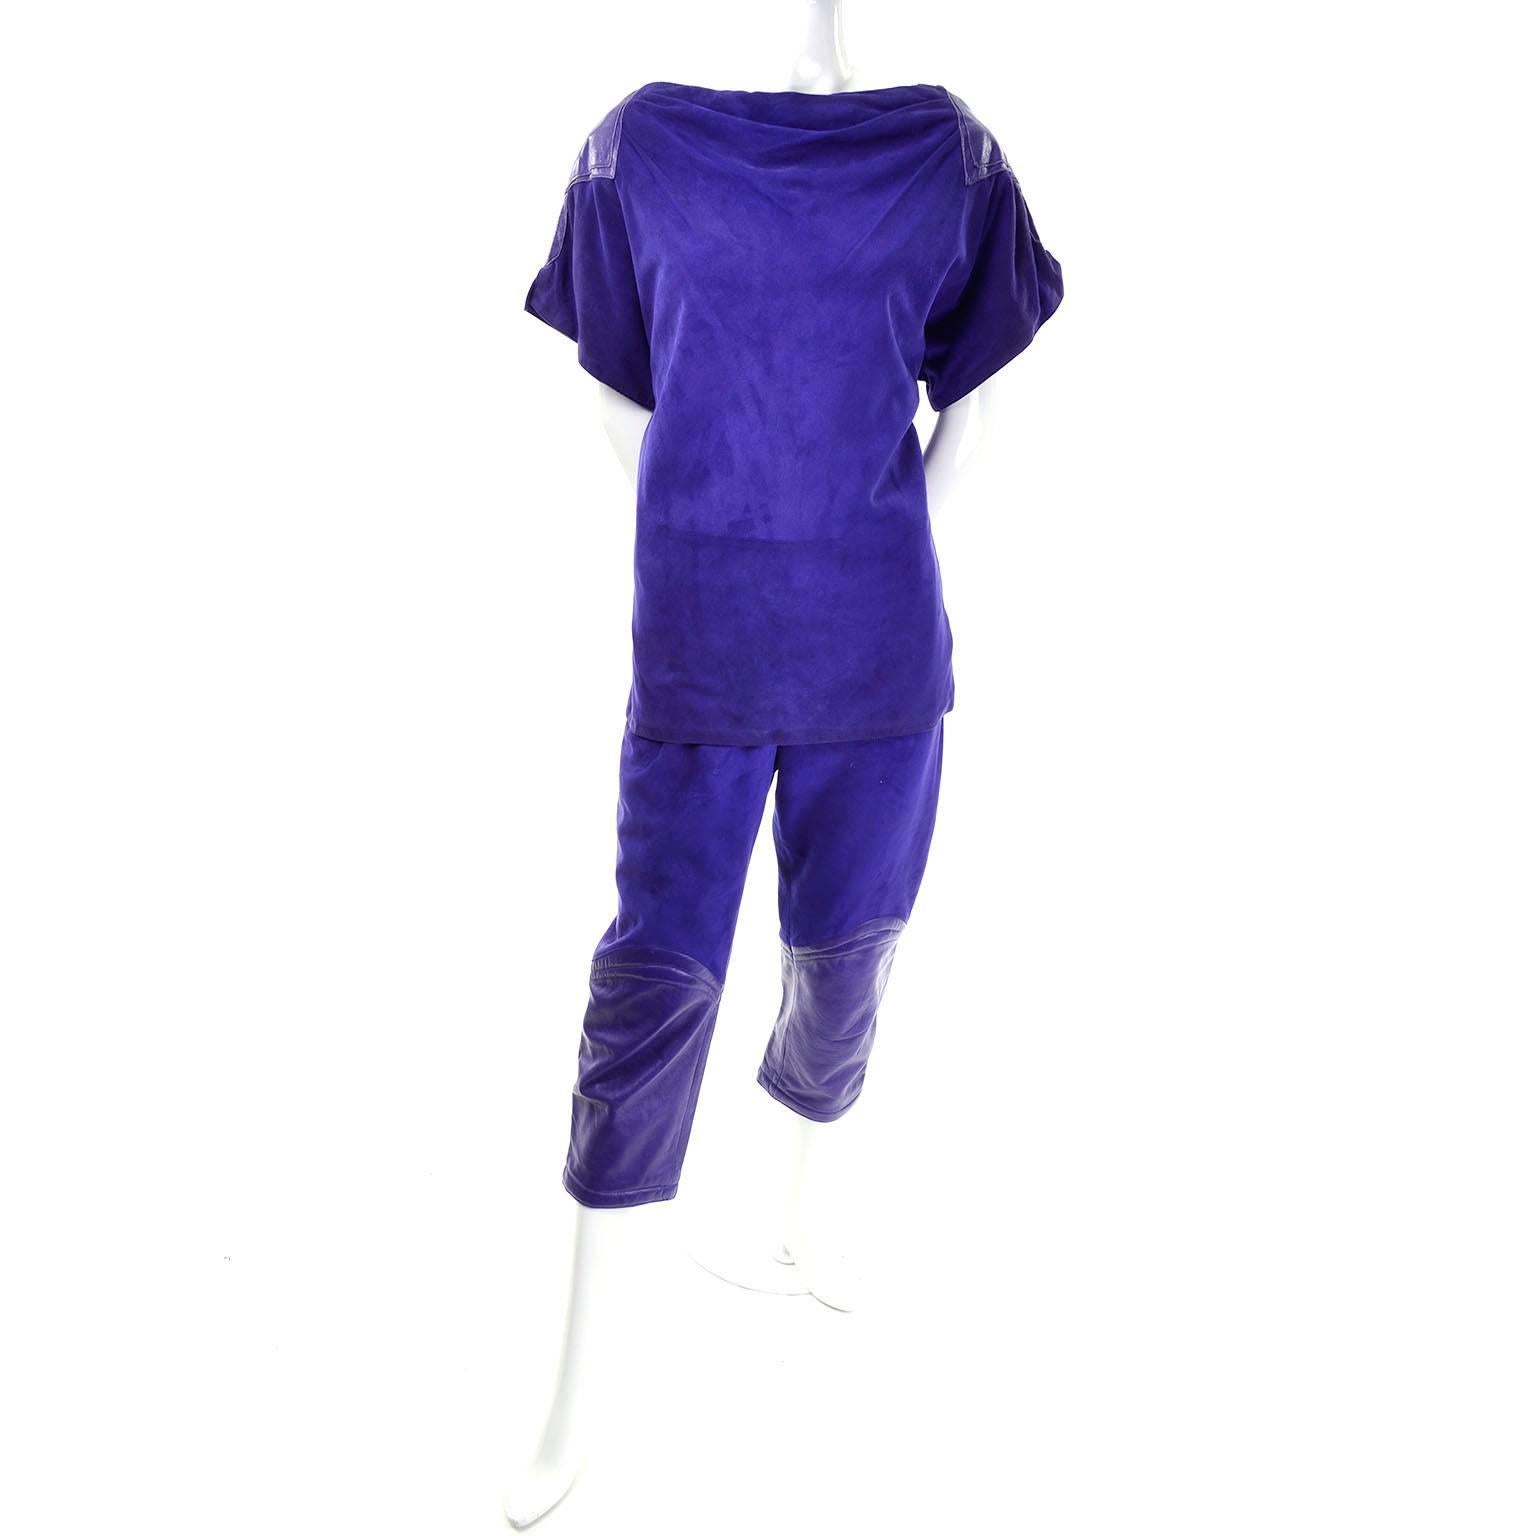 This deep purple lambswool suede top and pants outfit was designed by Claude Montana for Ideal Cuir in the late 1970's. This ensemble has matching purple leather on the calves, almost like extended knee pads, as well as in large triangles on the